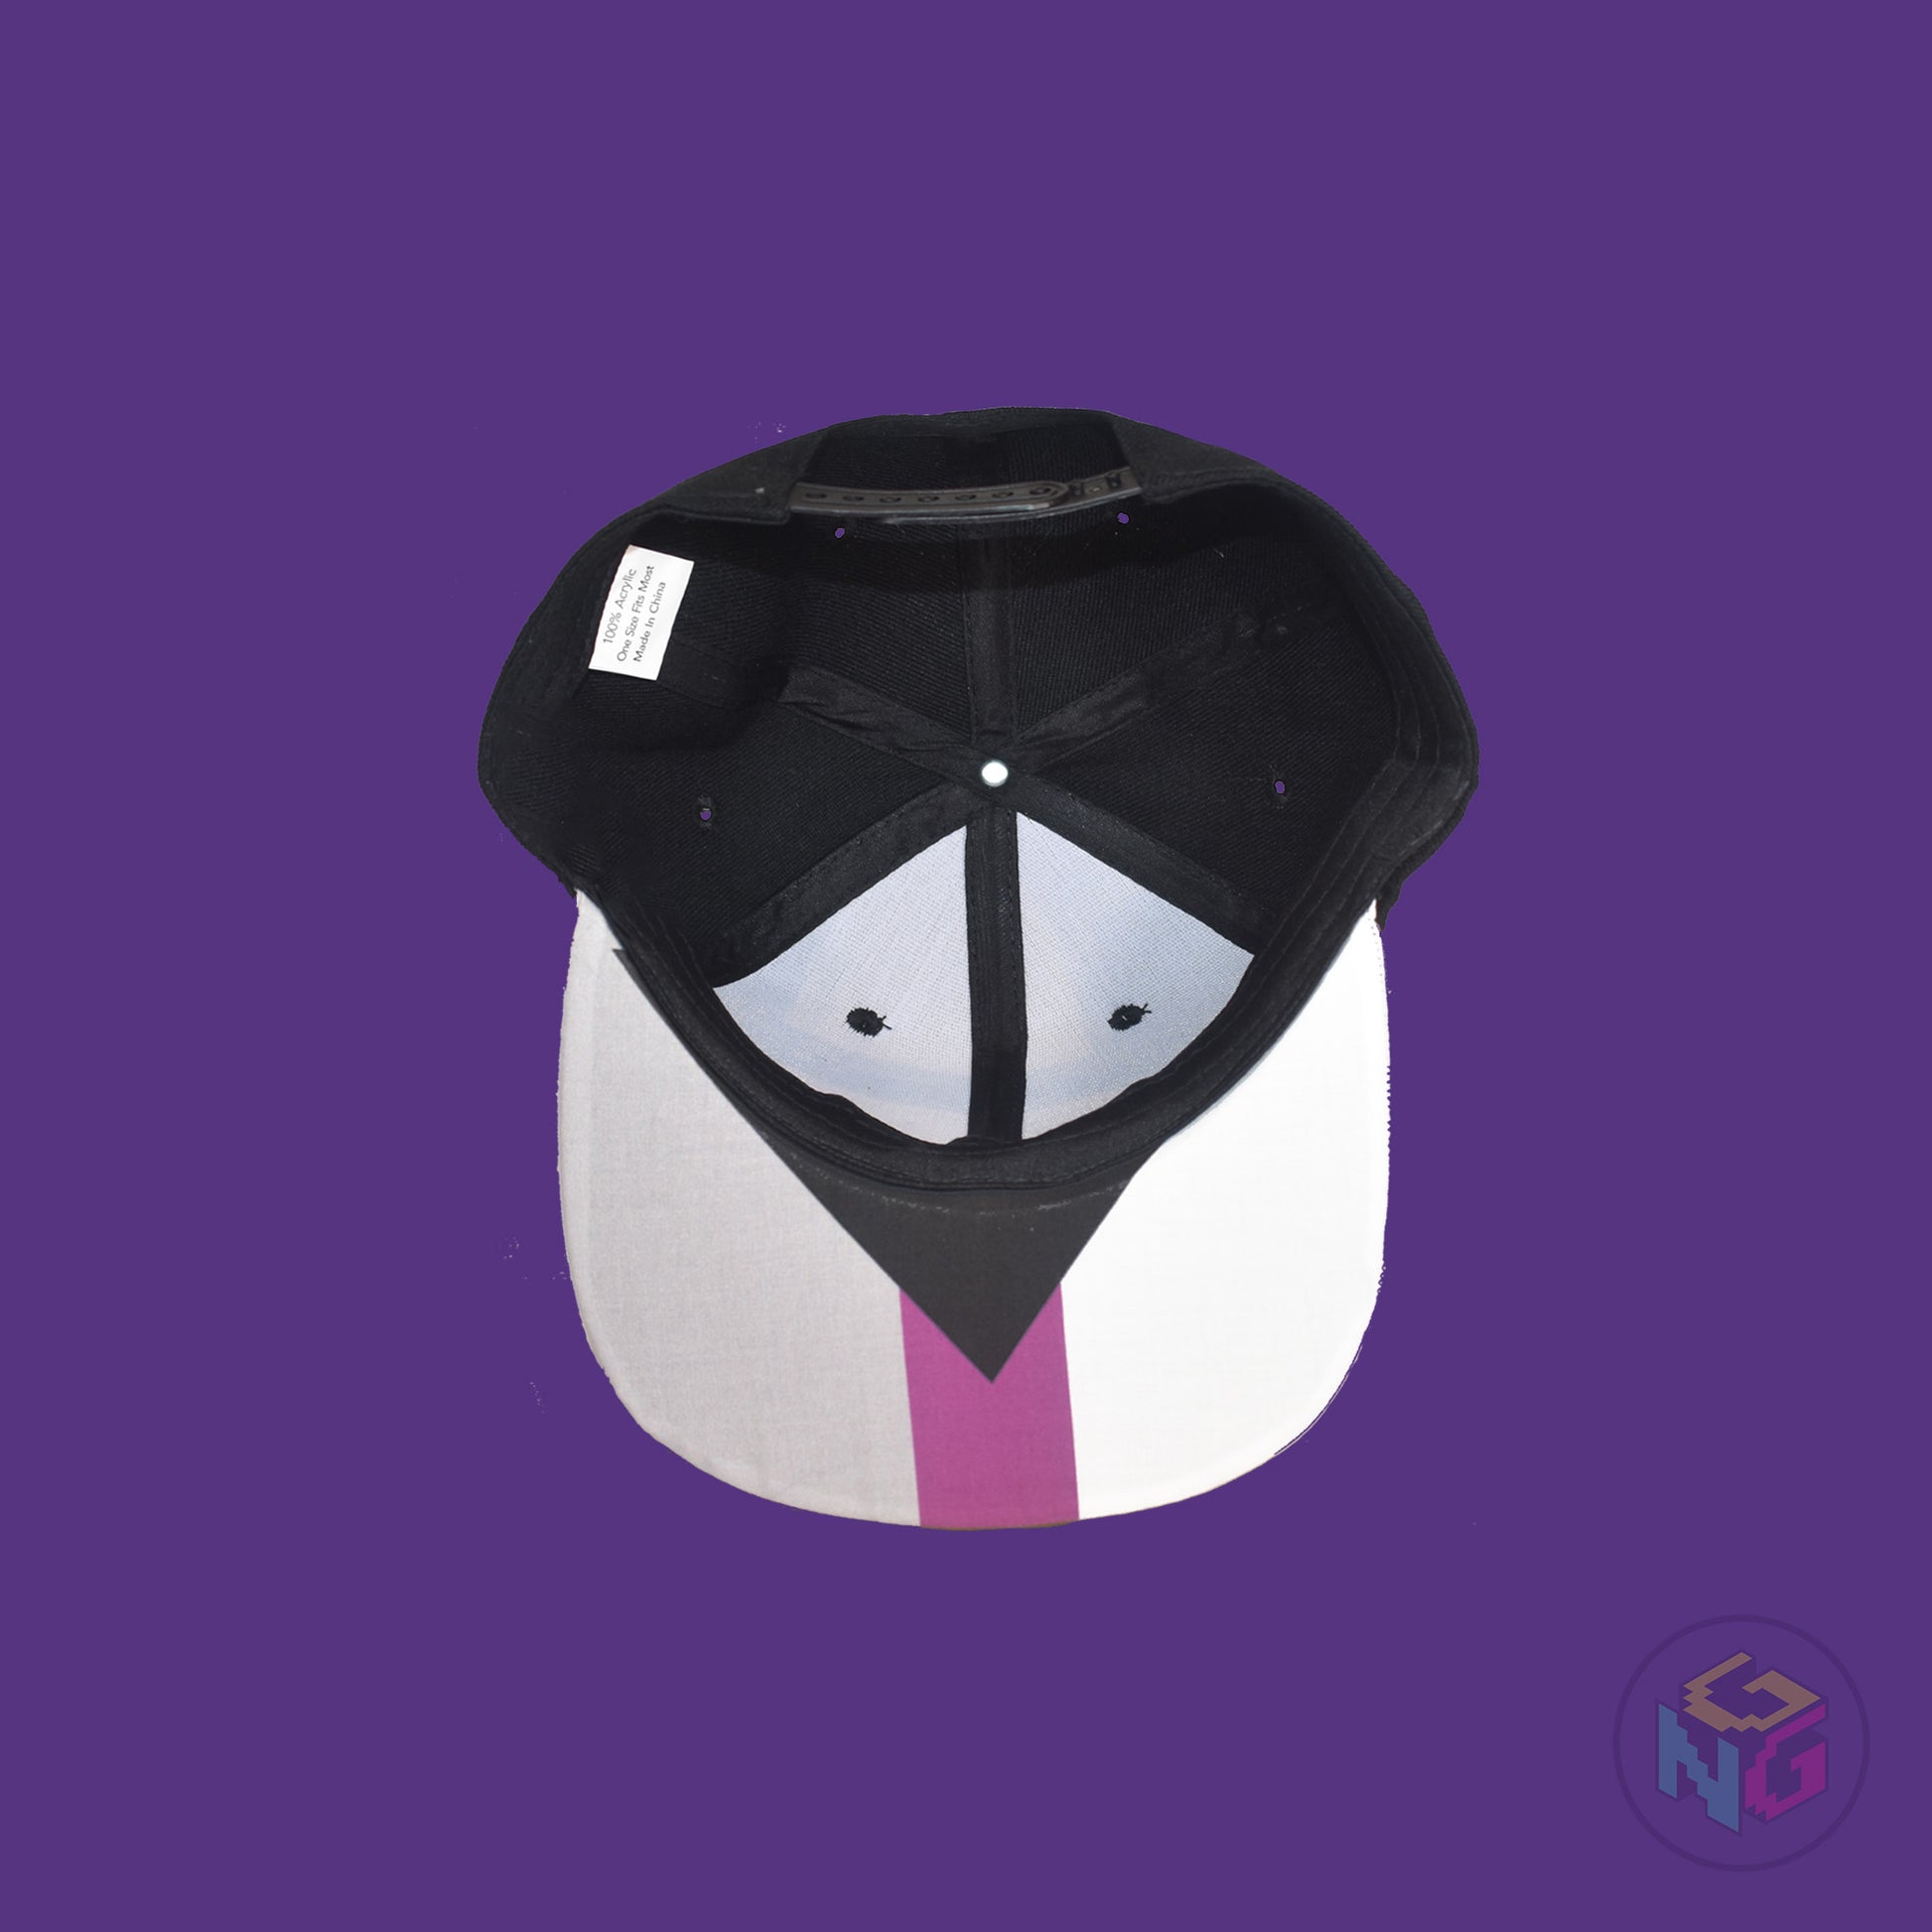 Black flat bill snapback hat. The brim has the demisexual pride flag on both sides and the front of the hat has the word “DEMI” in purple, white, and grey. Underside view